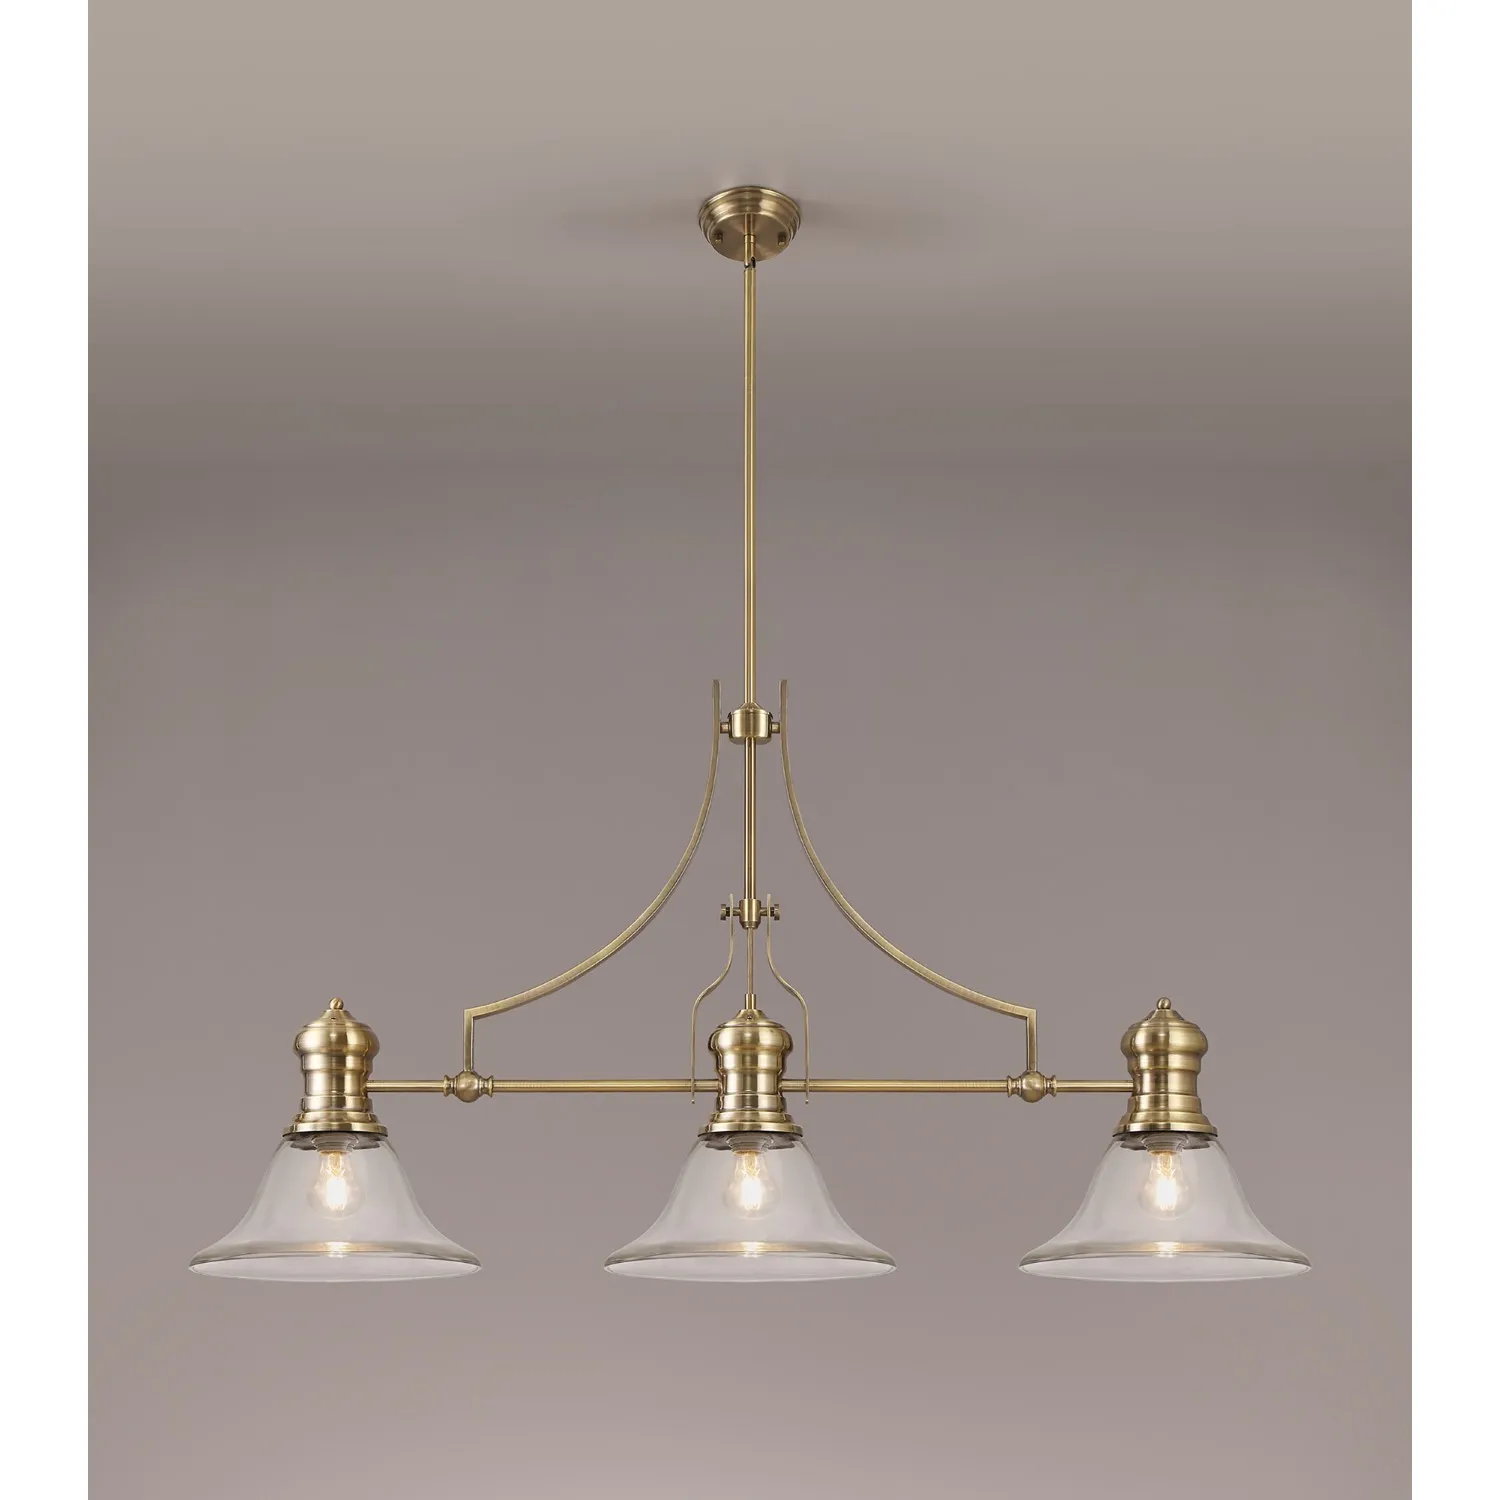 Sandy 3 Light Linear Pendant E27 With 30cm Smooth Bell Glass Shade, Antique Brass, Clear